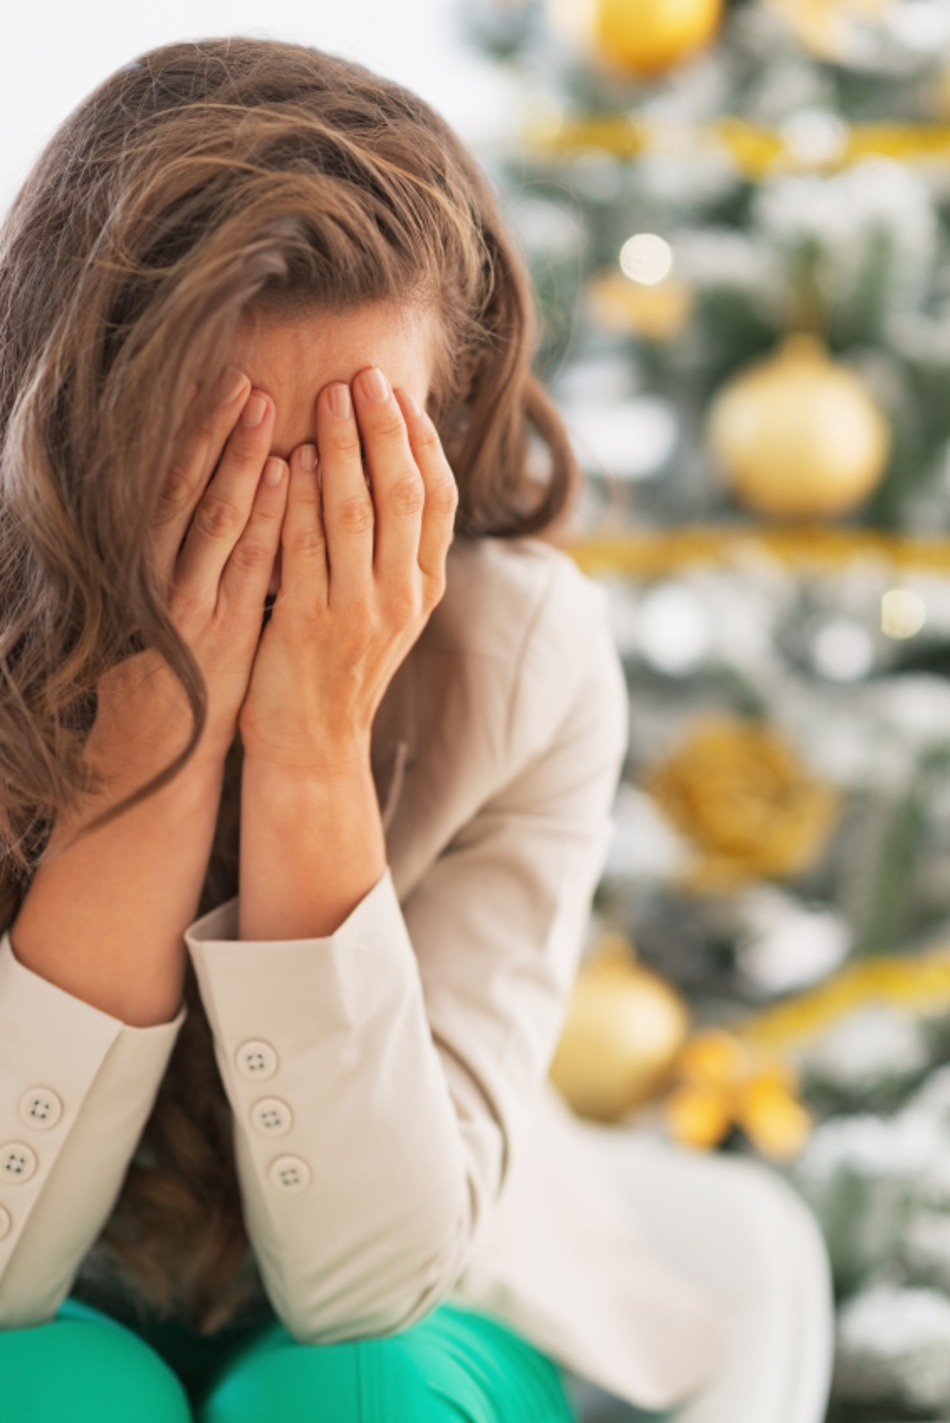 Coping with Holiday Depression